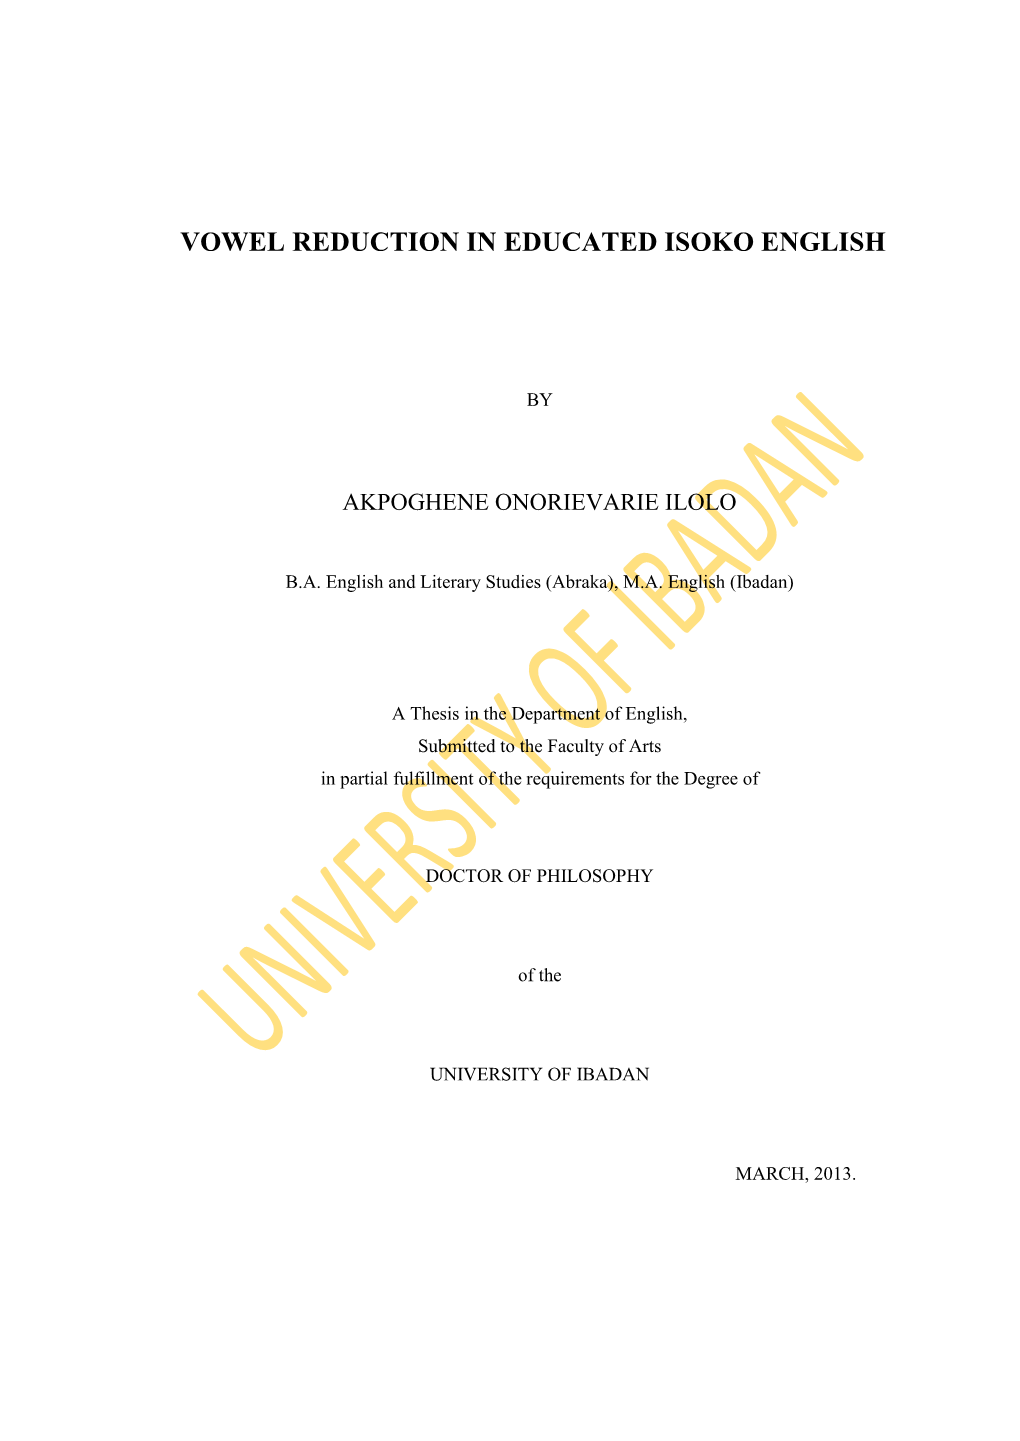 Vowel Reduction in Educated Isoko English